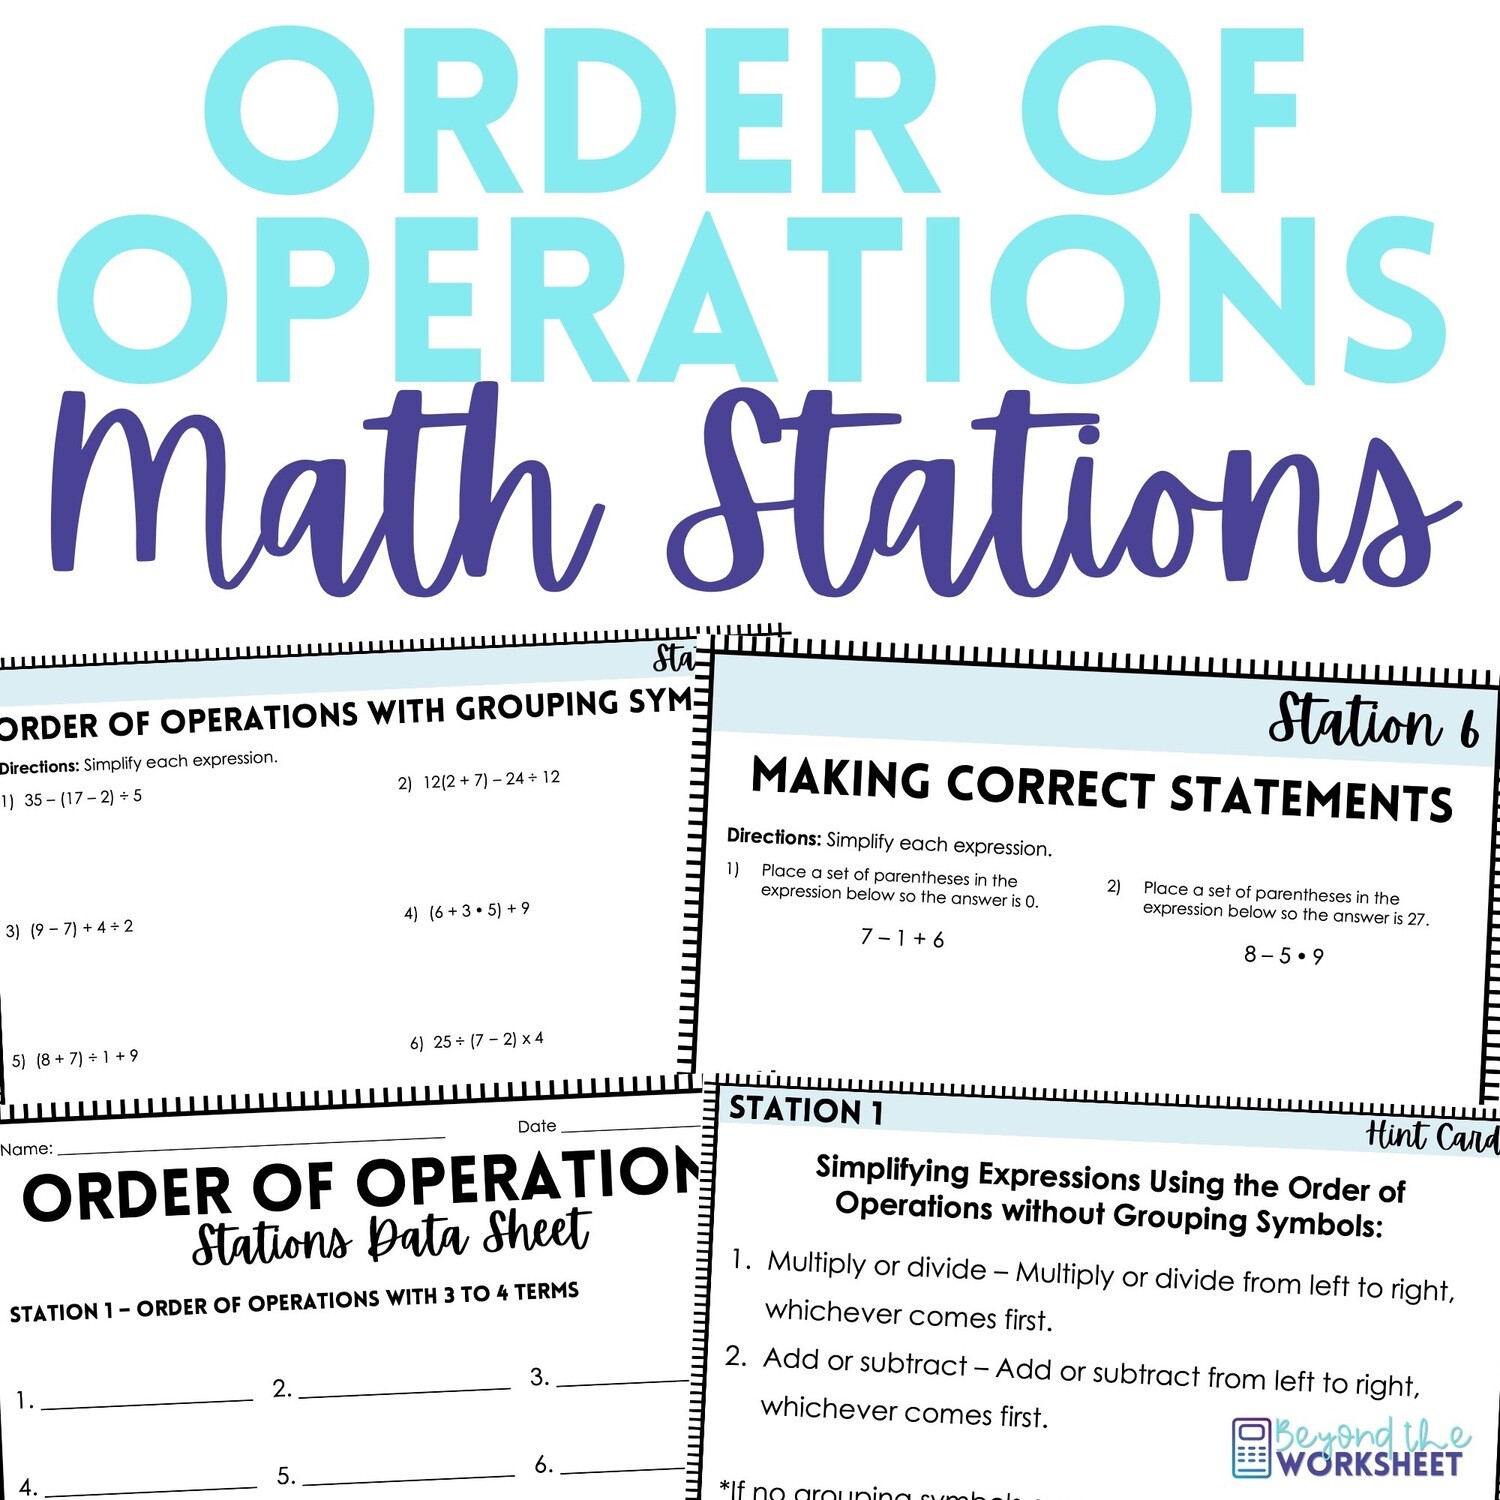 Order of Operations Middle School Math Stations